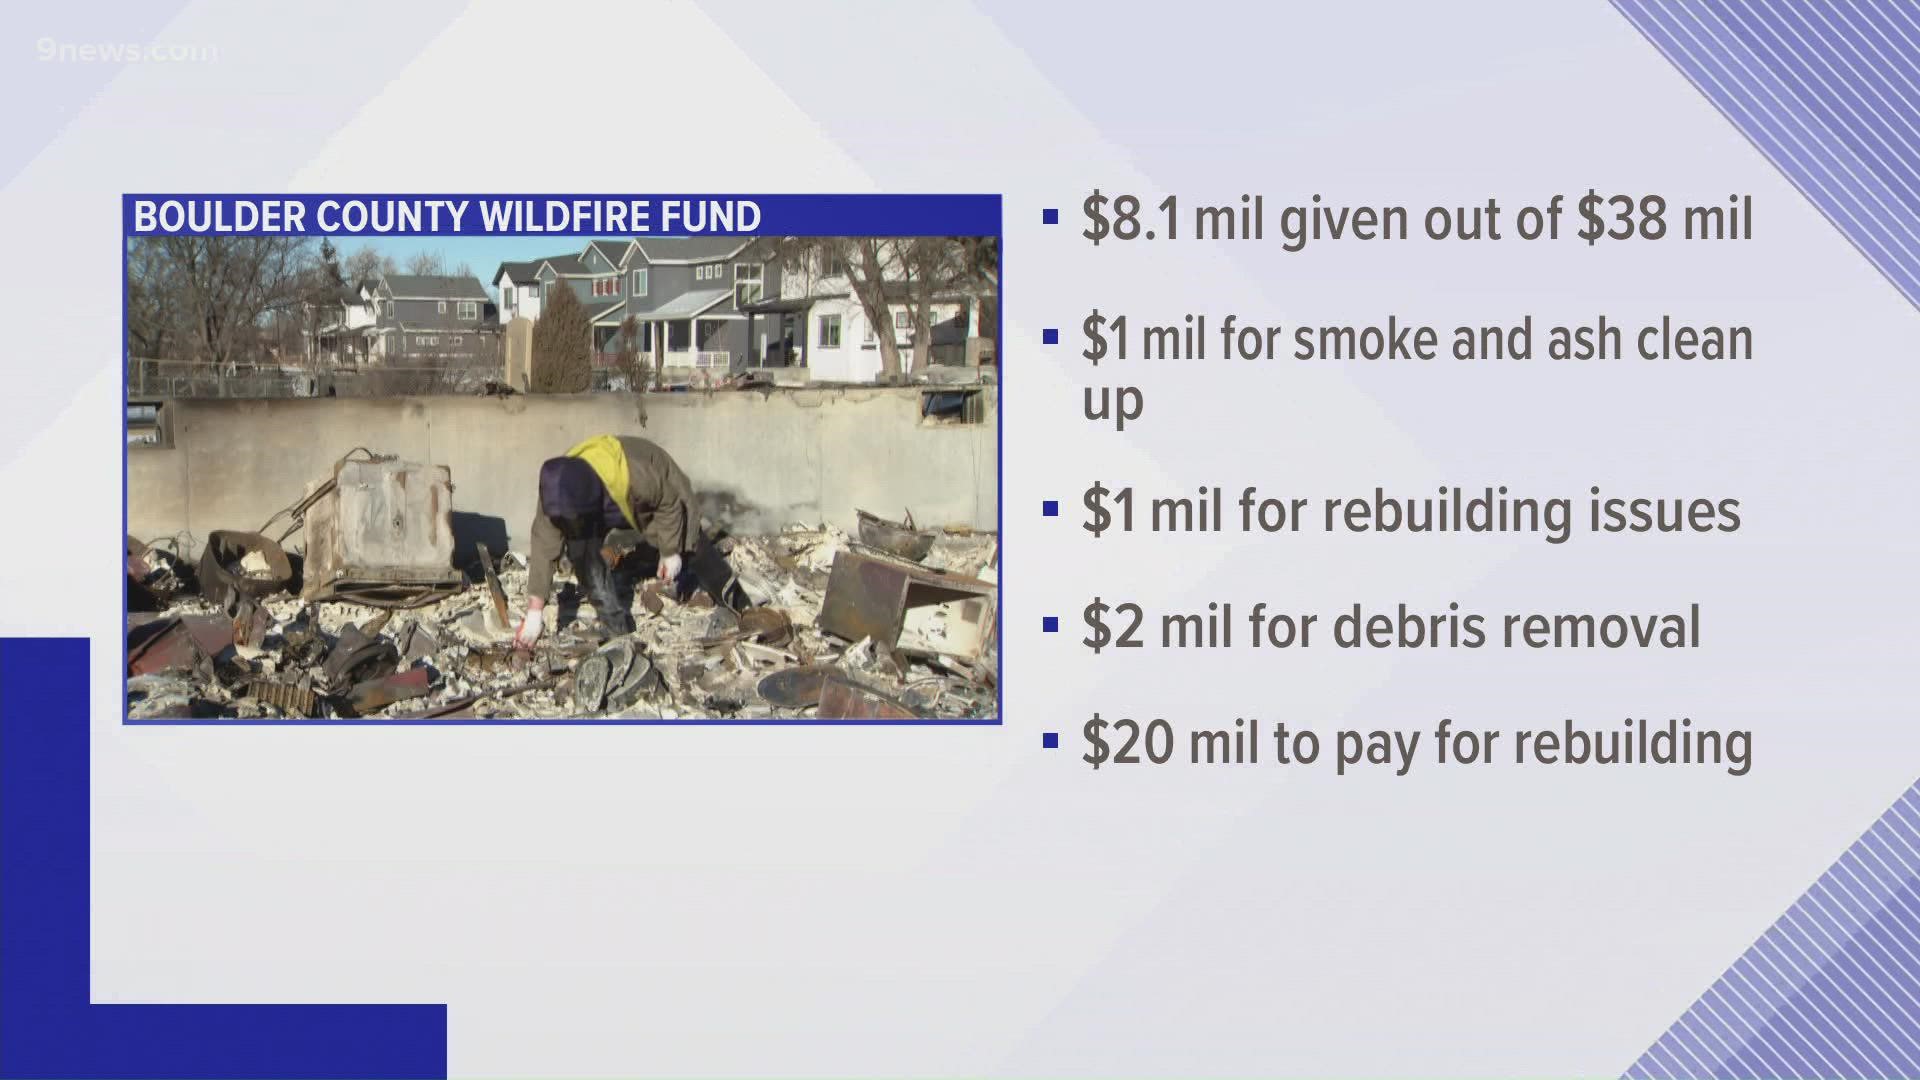 Community Foundation Boulder County already distributed more than $8 million of the donated funds to affected families in Louisville and Superior.